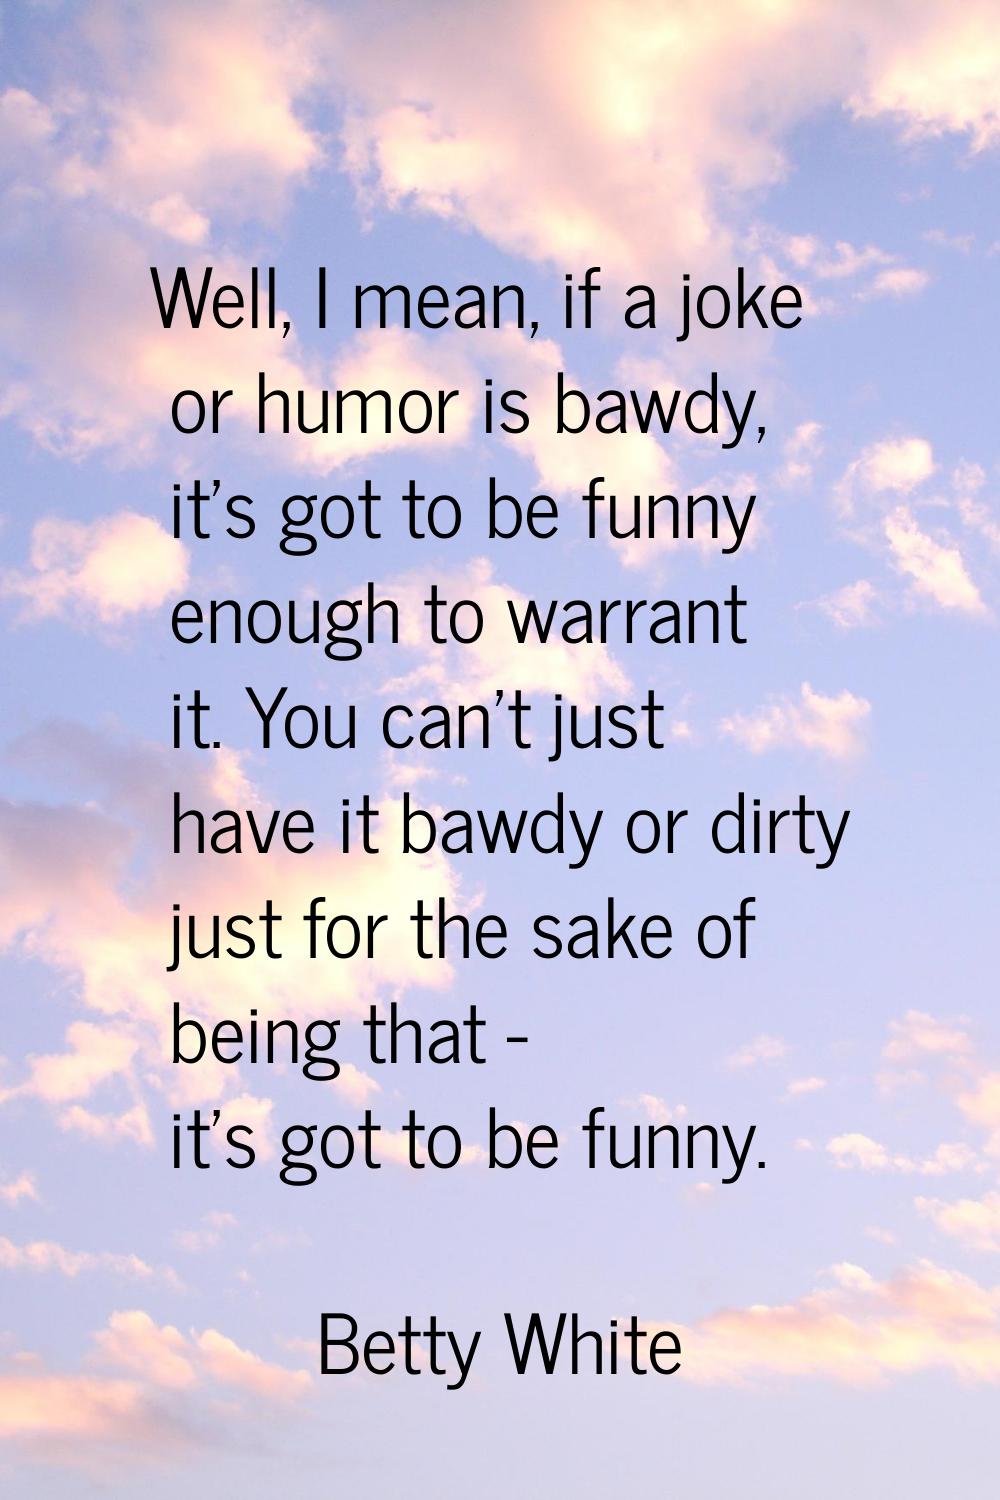 Well, I mean, if a joke or humor is bawdy, it's got to be funny enough to warrant it. You can't jus